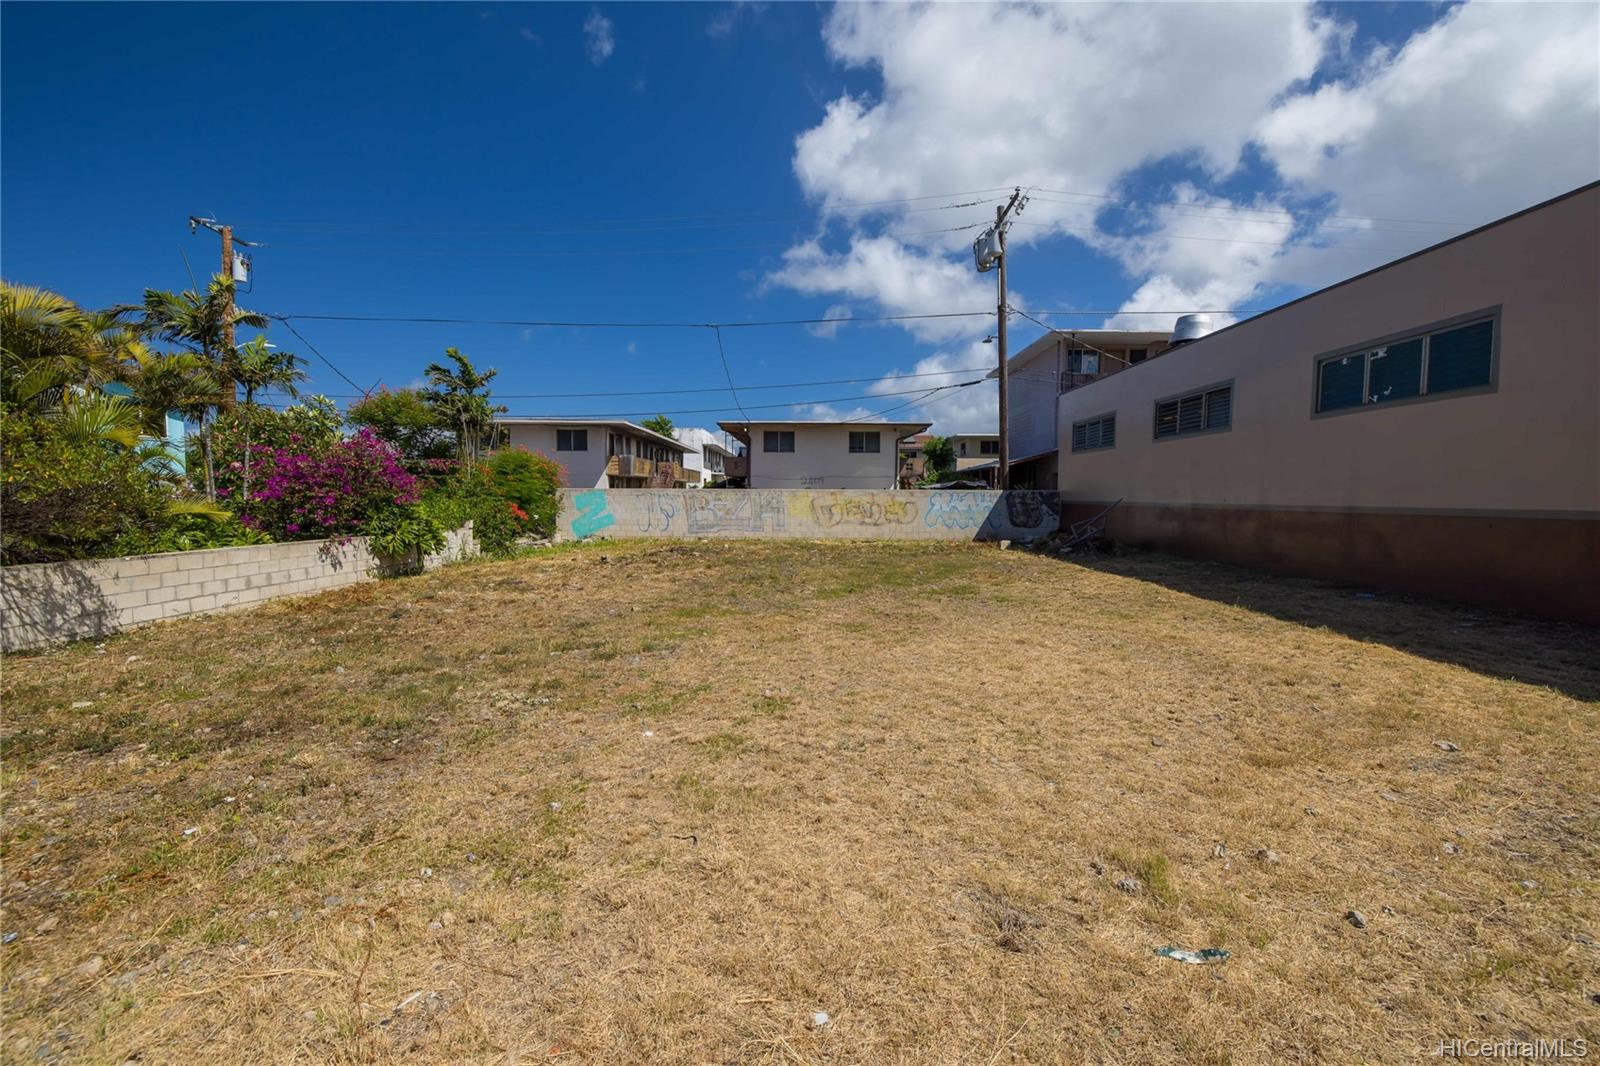 1324 Middle Street  Honolulu, Hi vacant land for sale - photo 2 of 4